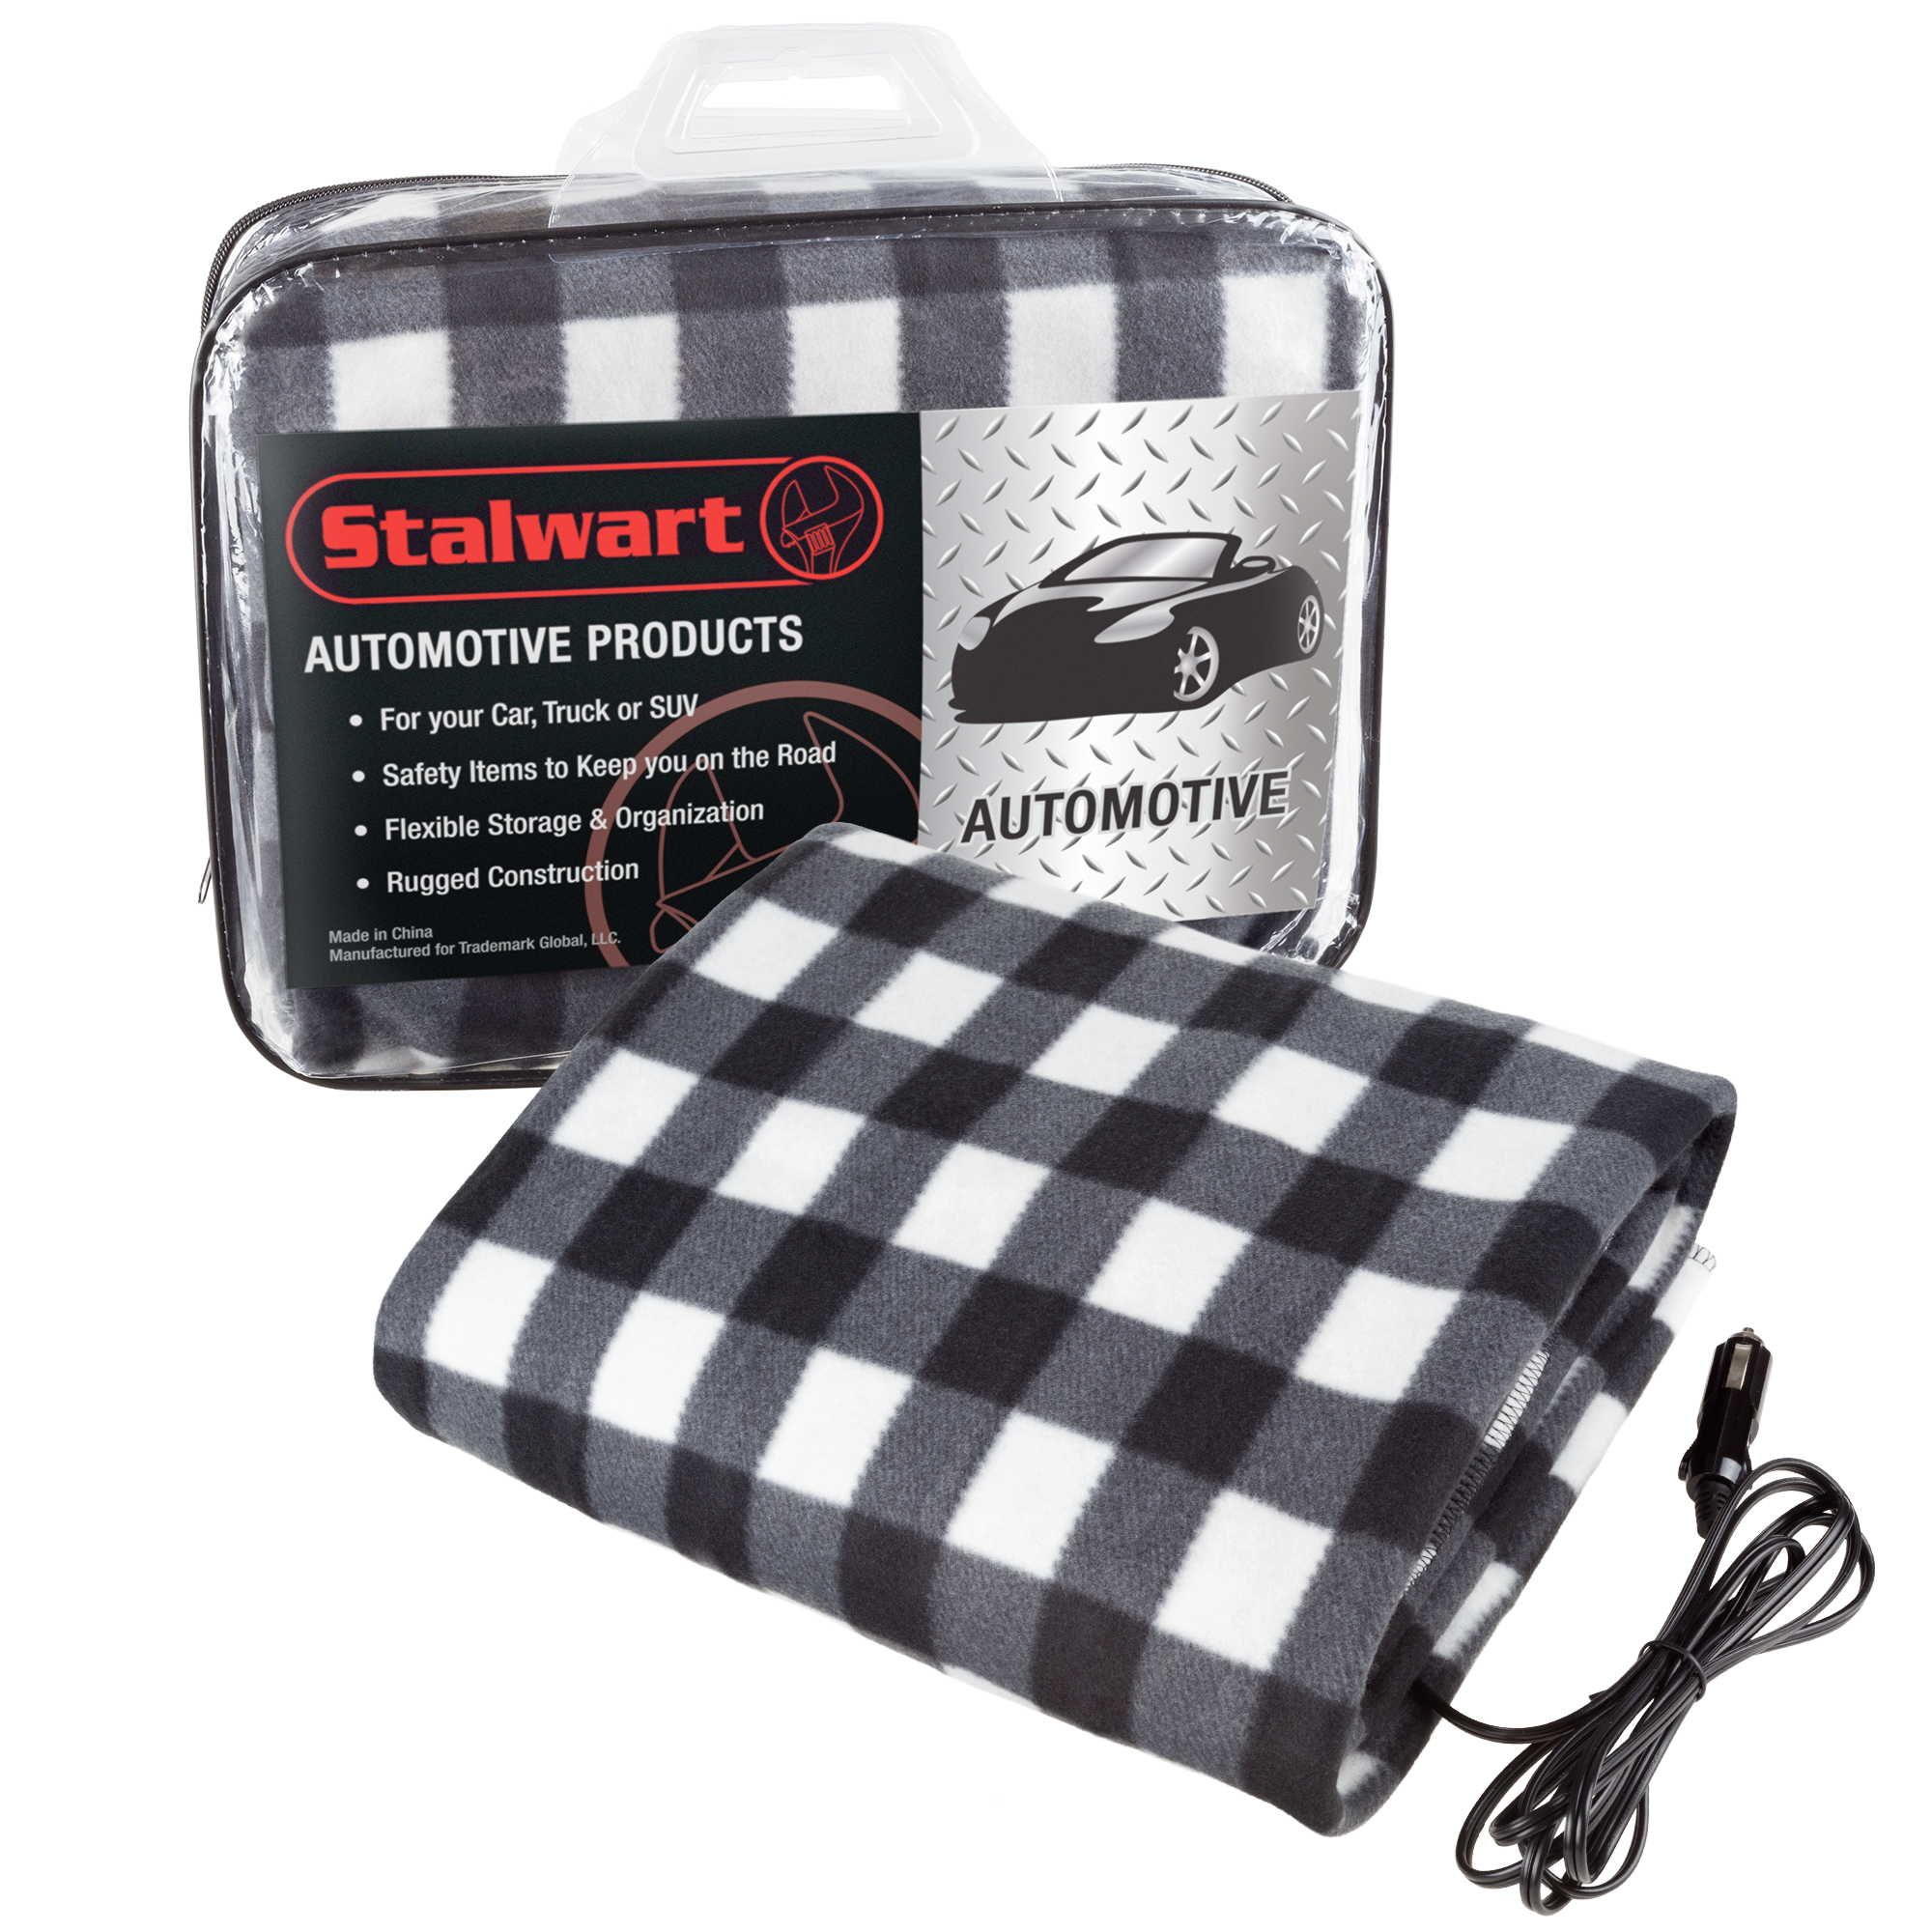 Stalwart Electric Car Blanket Heated 12V Polar Fleece Travel Throw for Truck and RV, Black and White - image 1 of 6